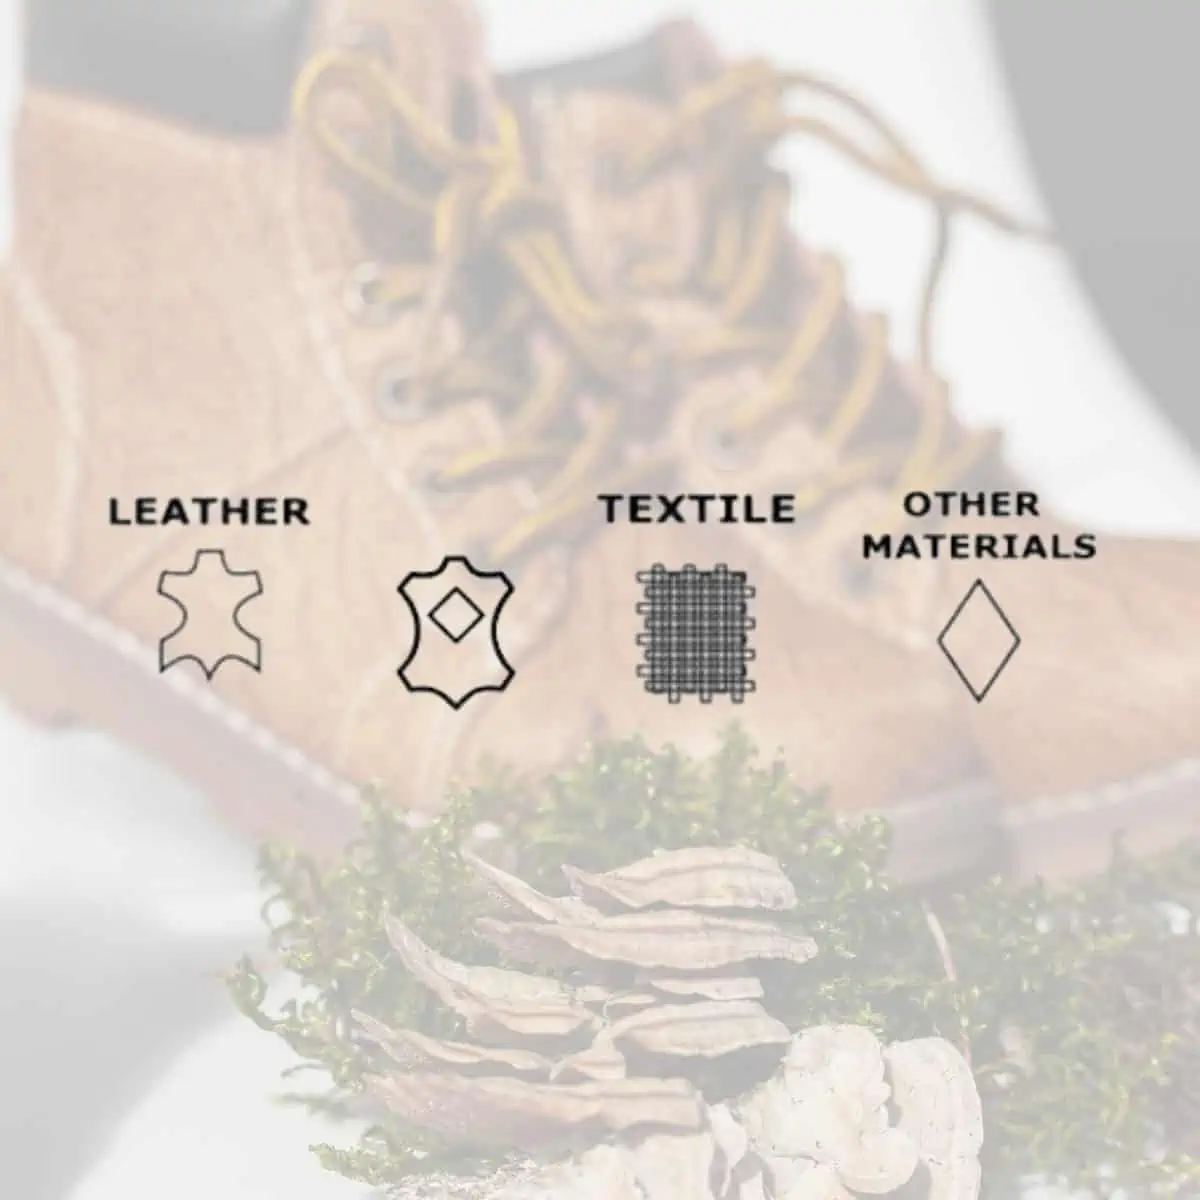 Leather symbols that show what a product is made from. 